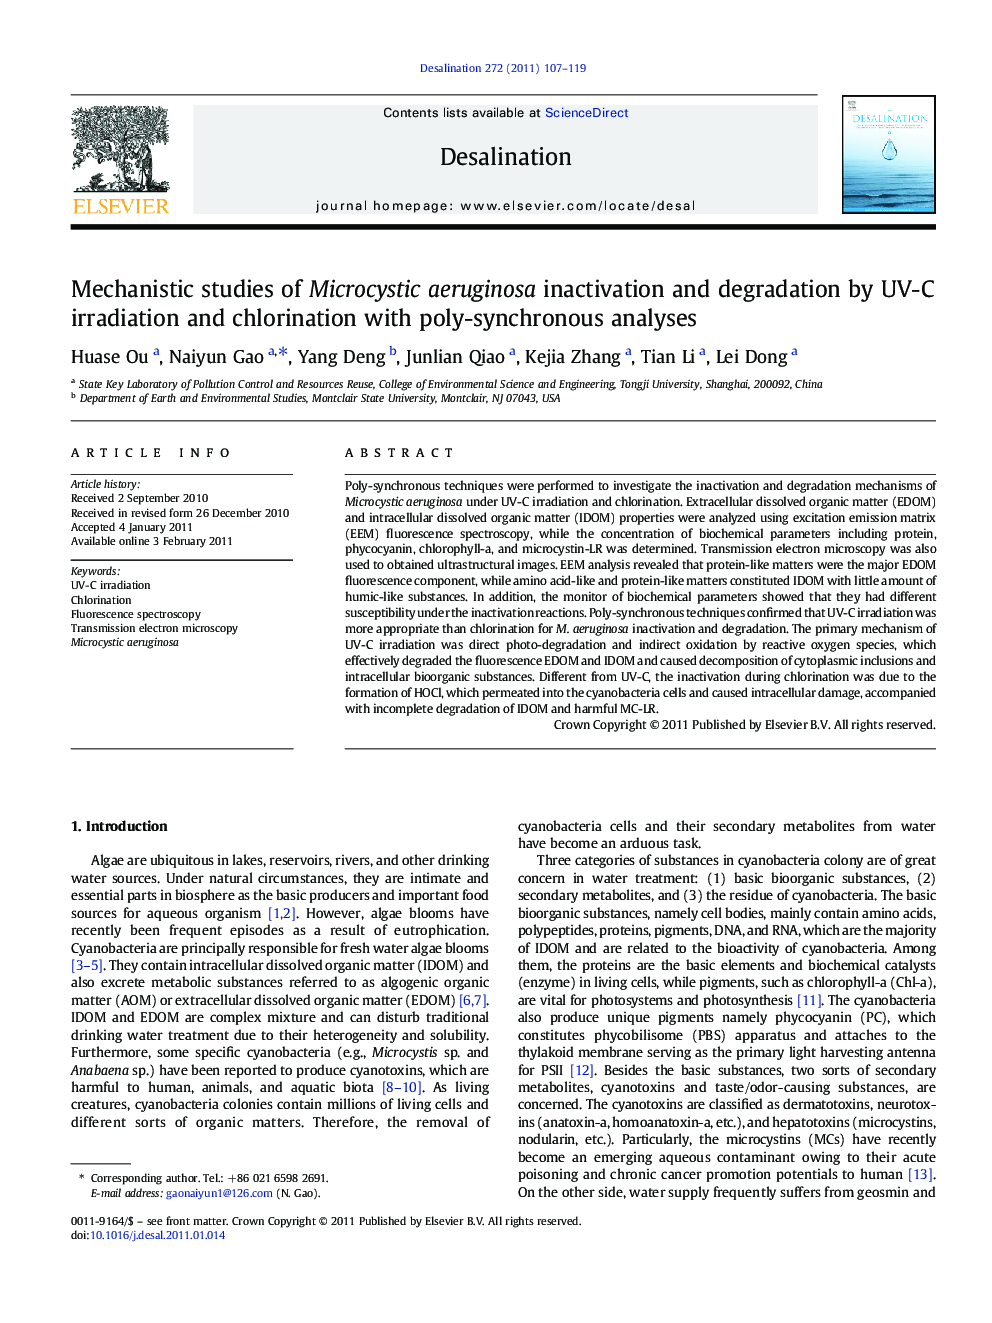 Mechanistic studies of Microcystic aeruginosa inactivation and degradation by UV-C irradiation and chlorination with poly-synchronous analyses